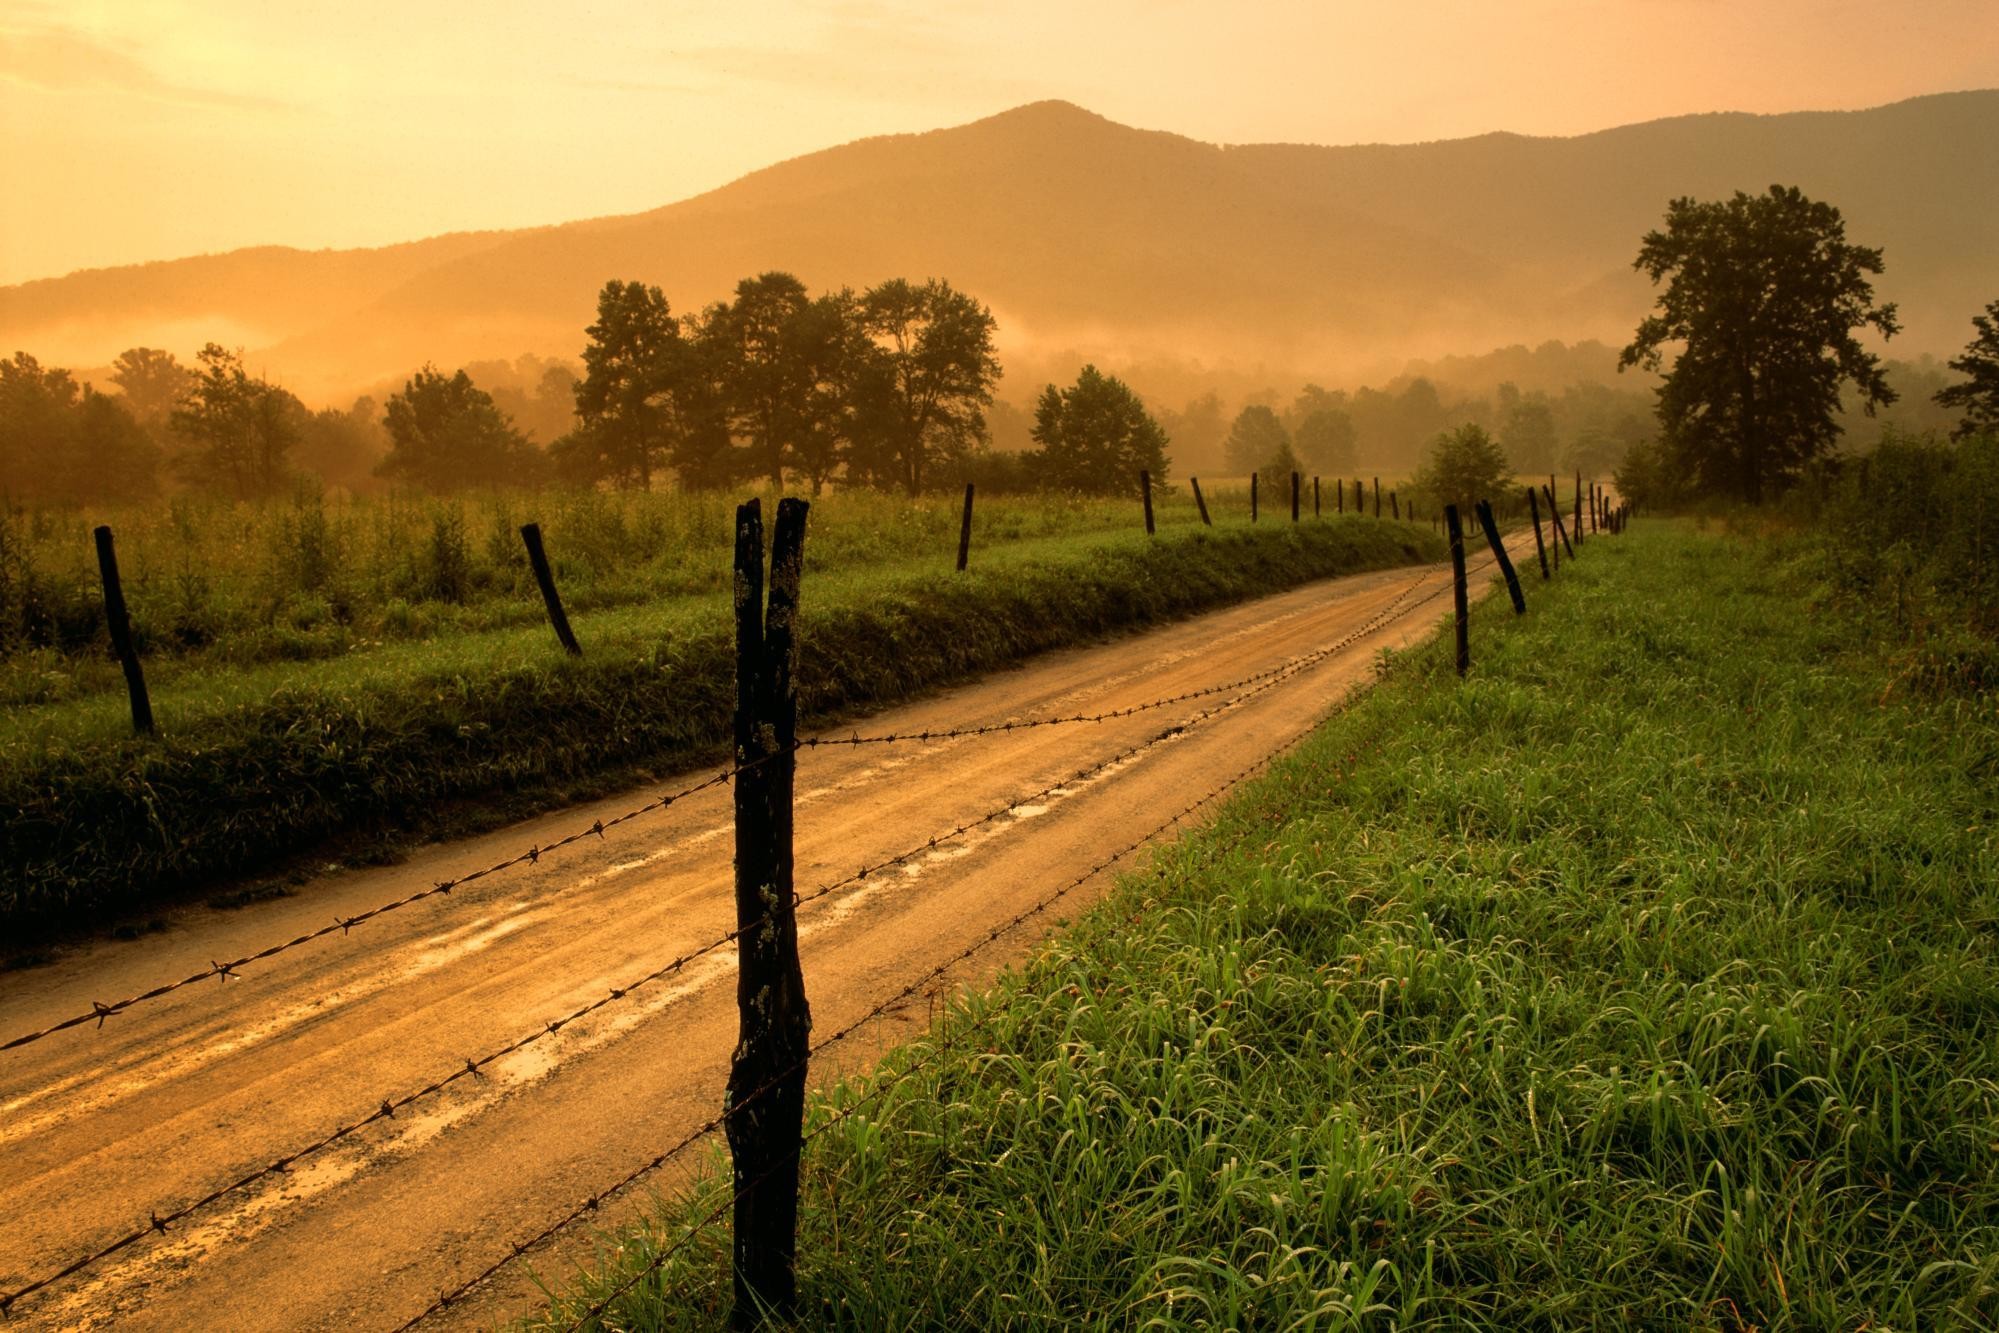 Country Images By Annalisa Dauenhauer On Nmgncp - Old Country Dirt Road - HD Wallpaper 